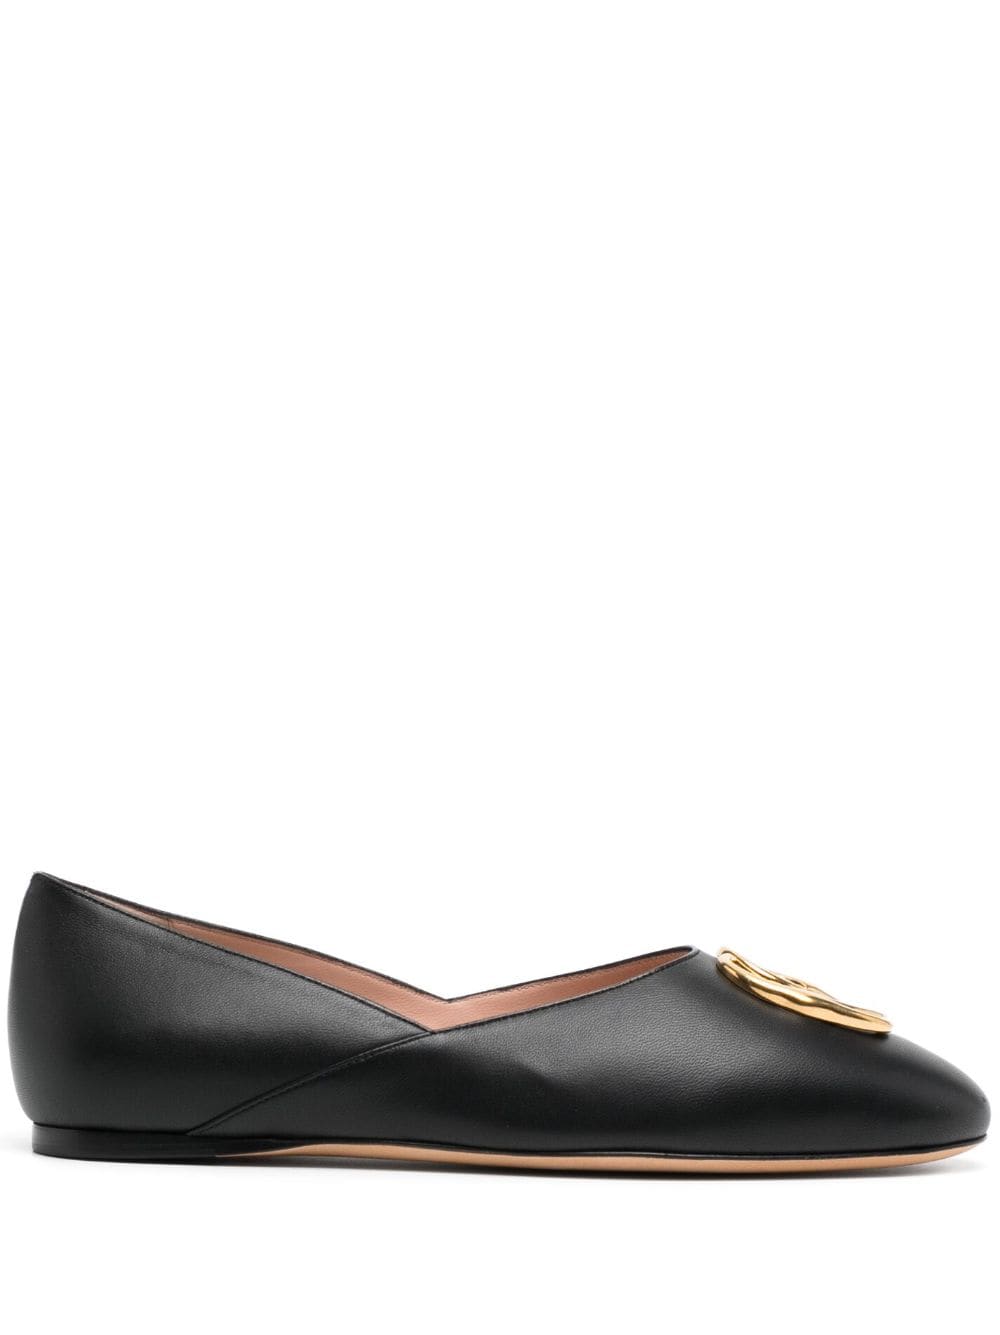 Gerry leather ballerina shoes